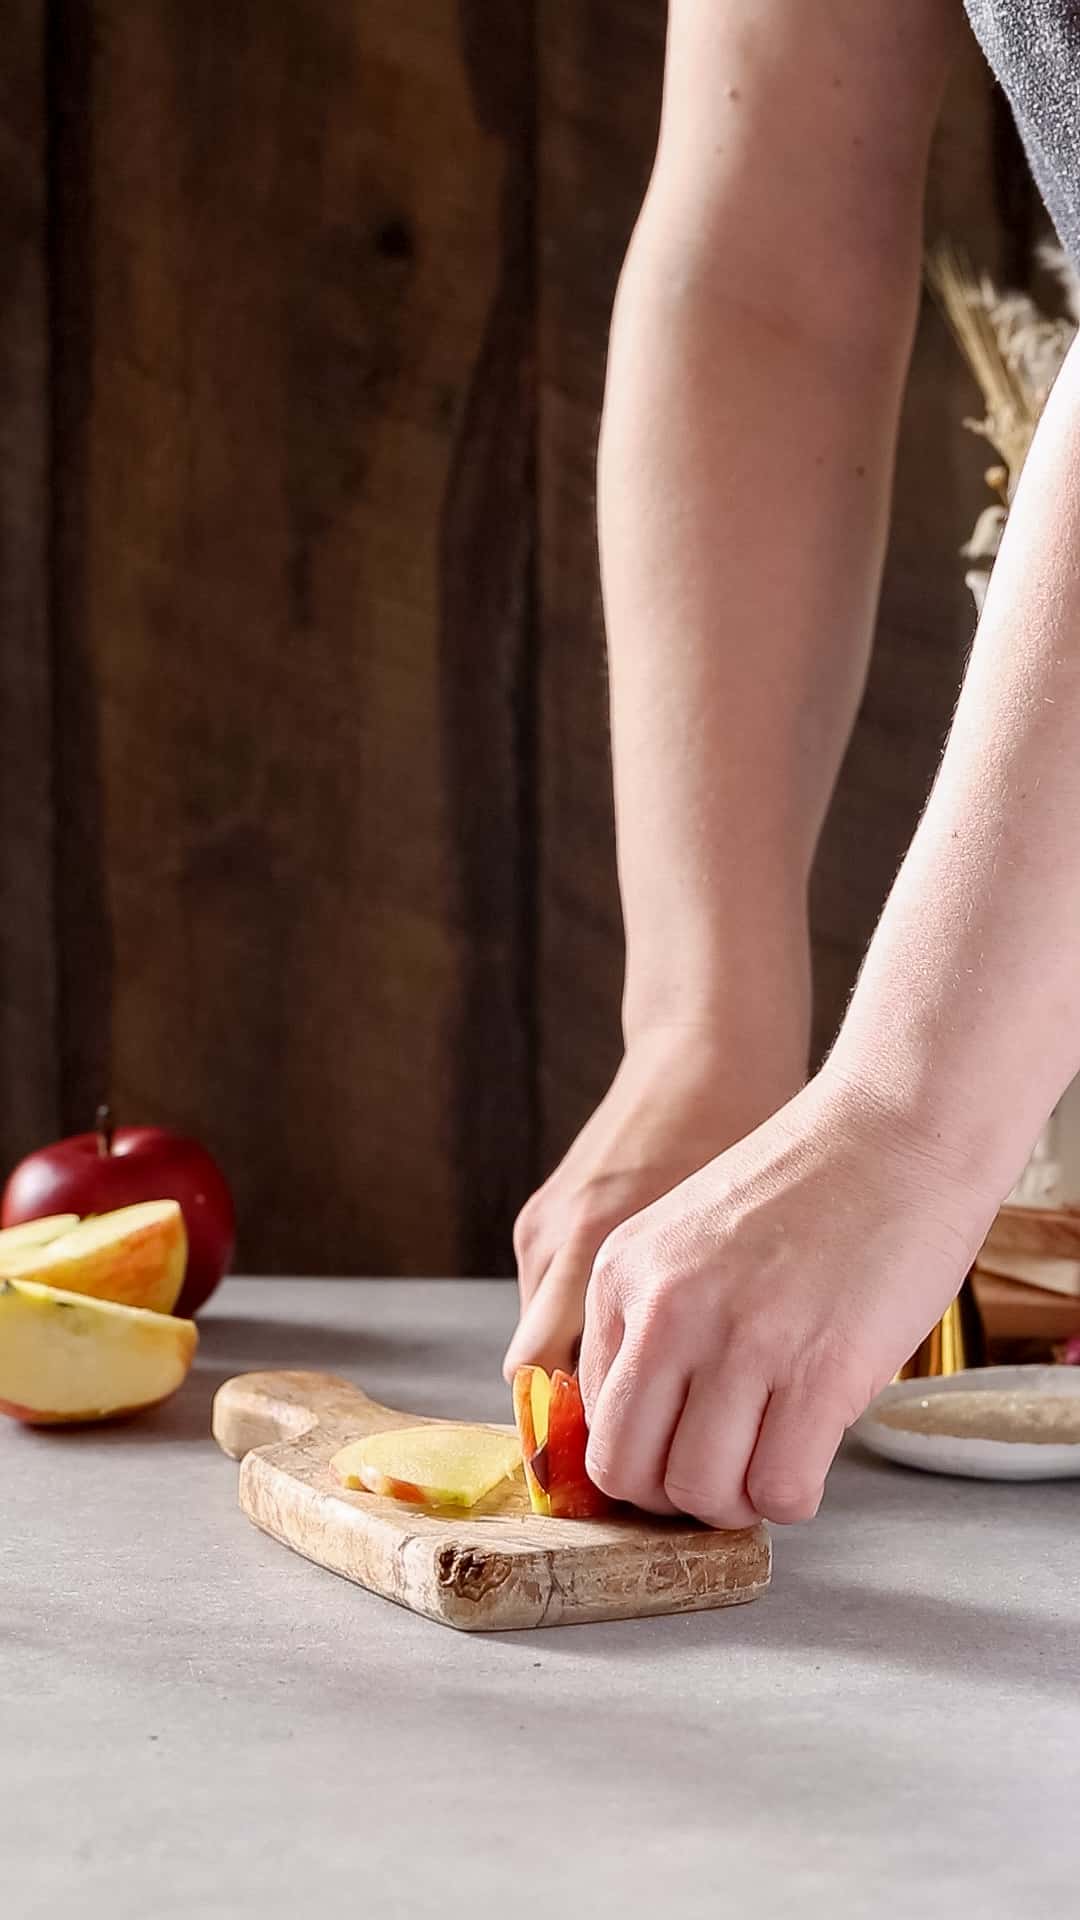 Hands using a knife to cut an apple slice.